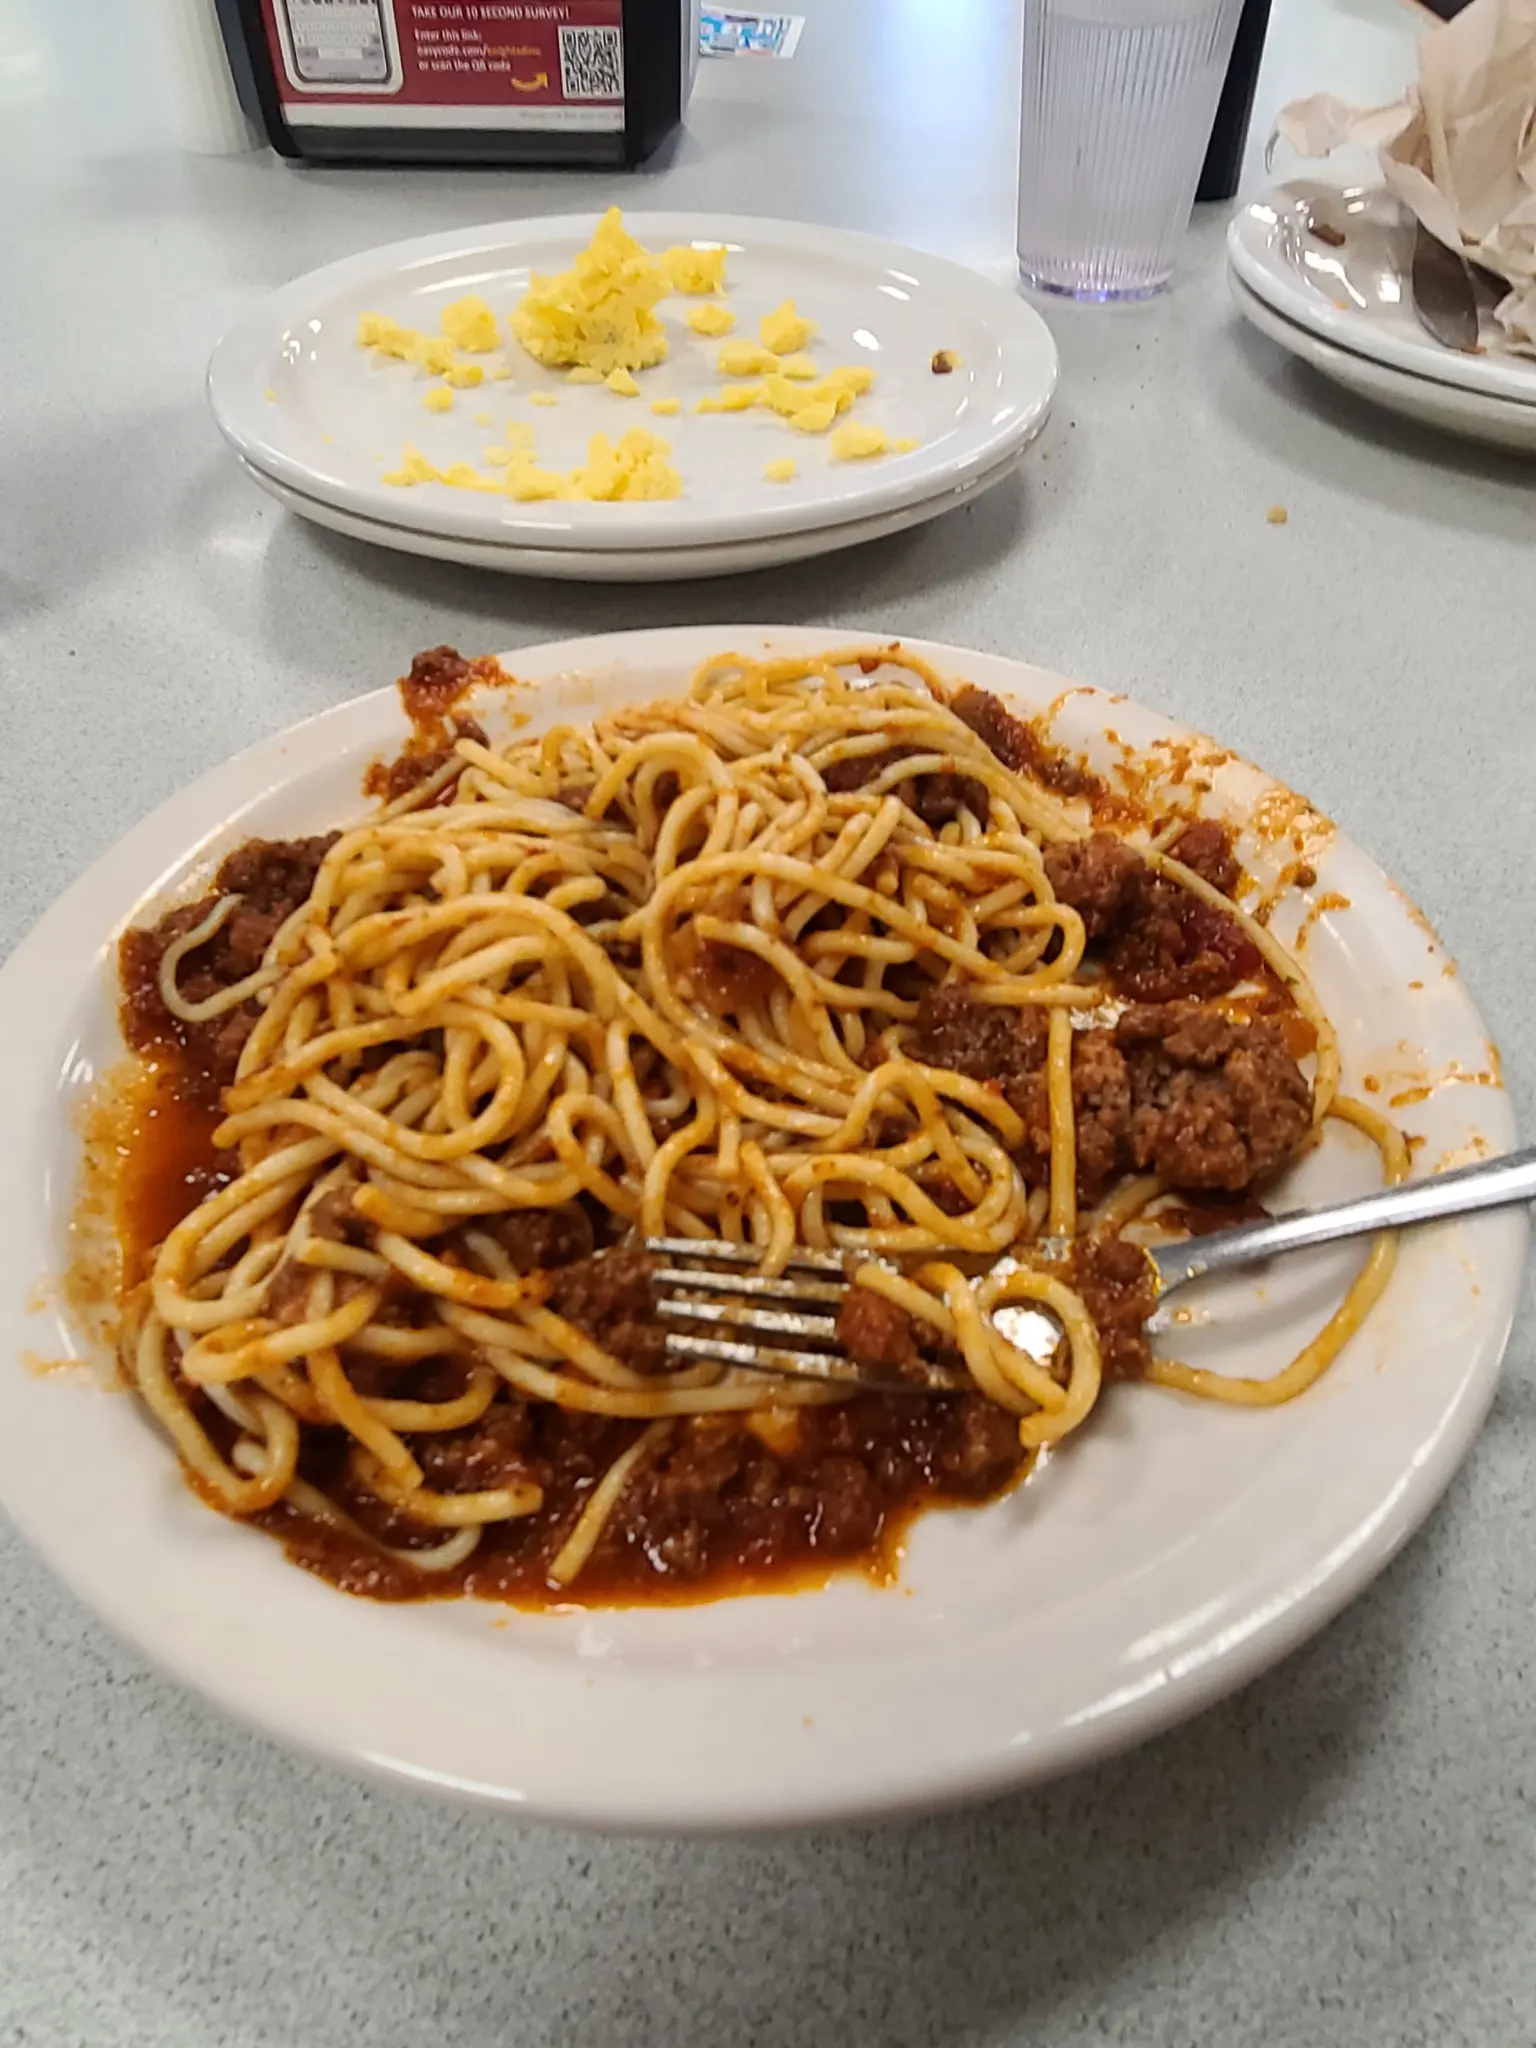 Spaghetti and meatballs from the Dining Hall.